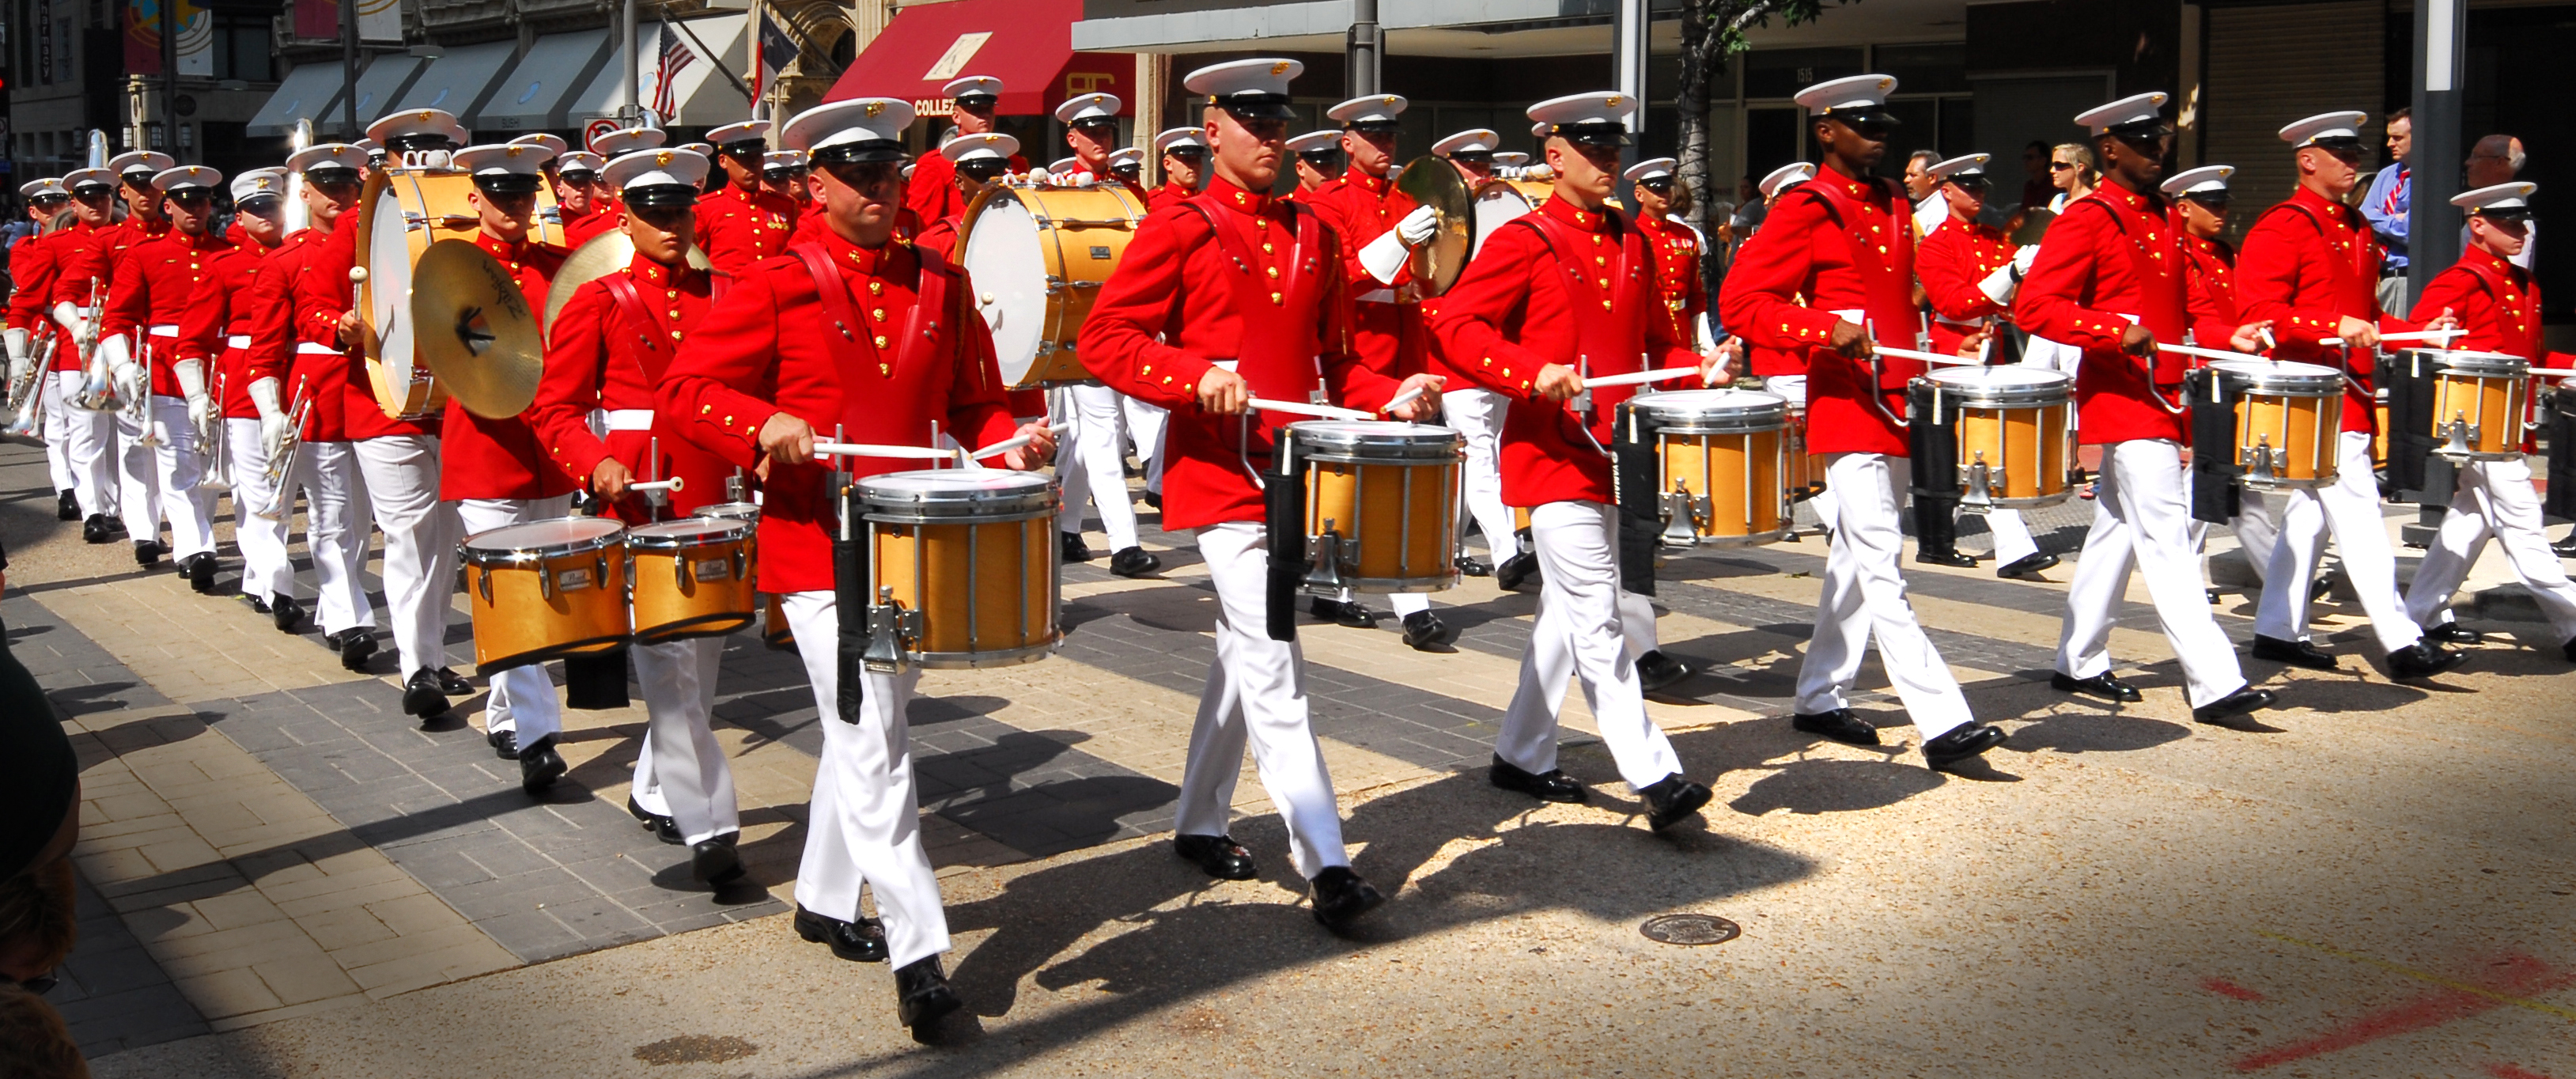 File:Marching band drummers in parade at Texas State Fair 2007.jpg ...